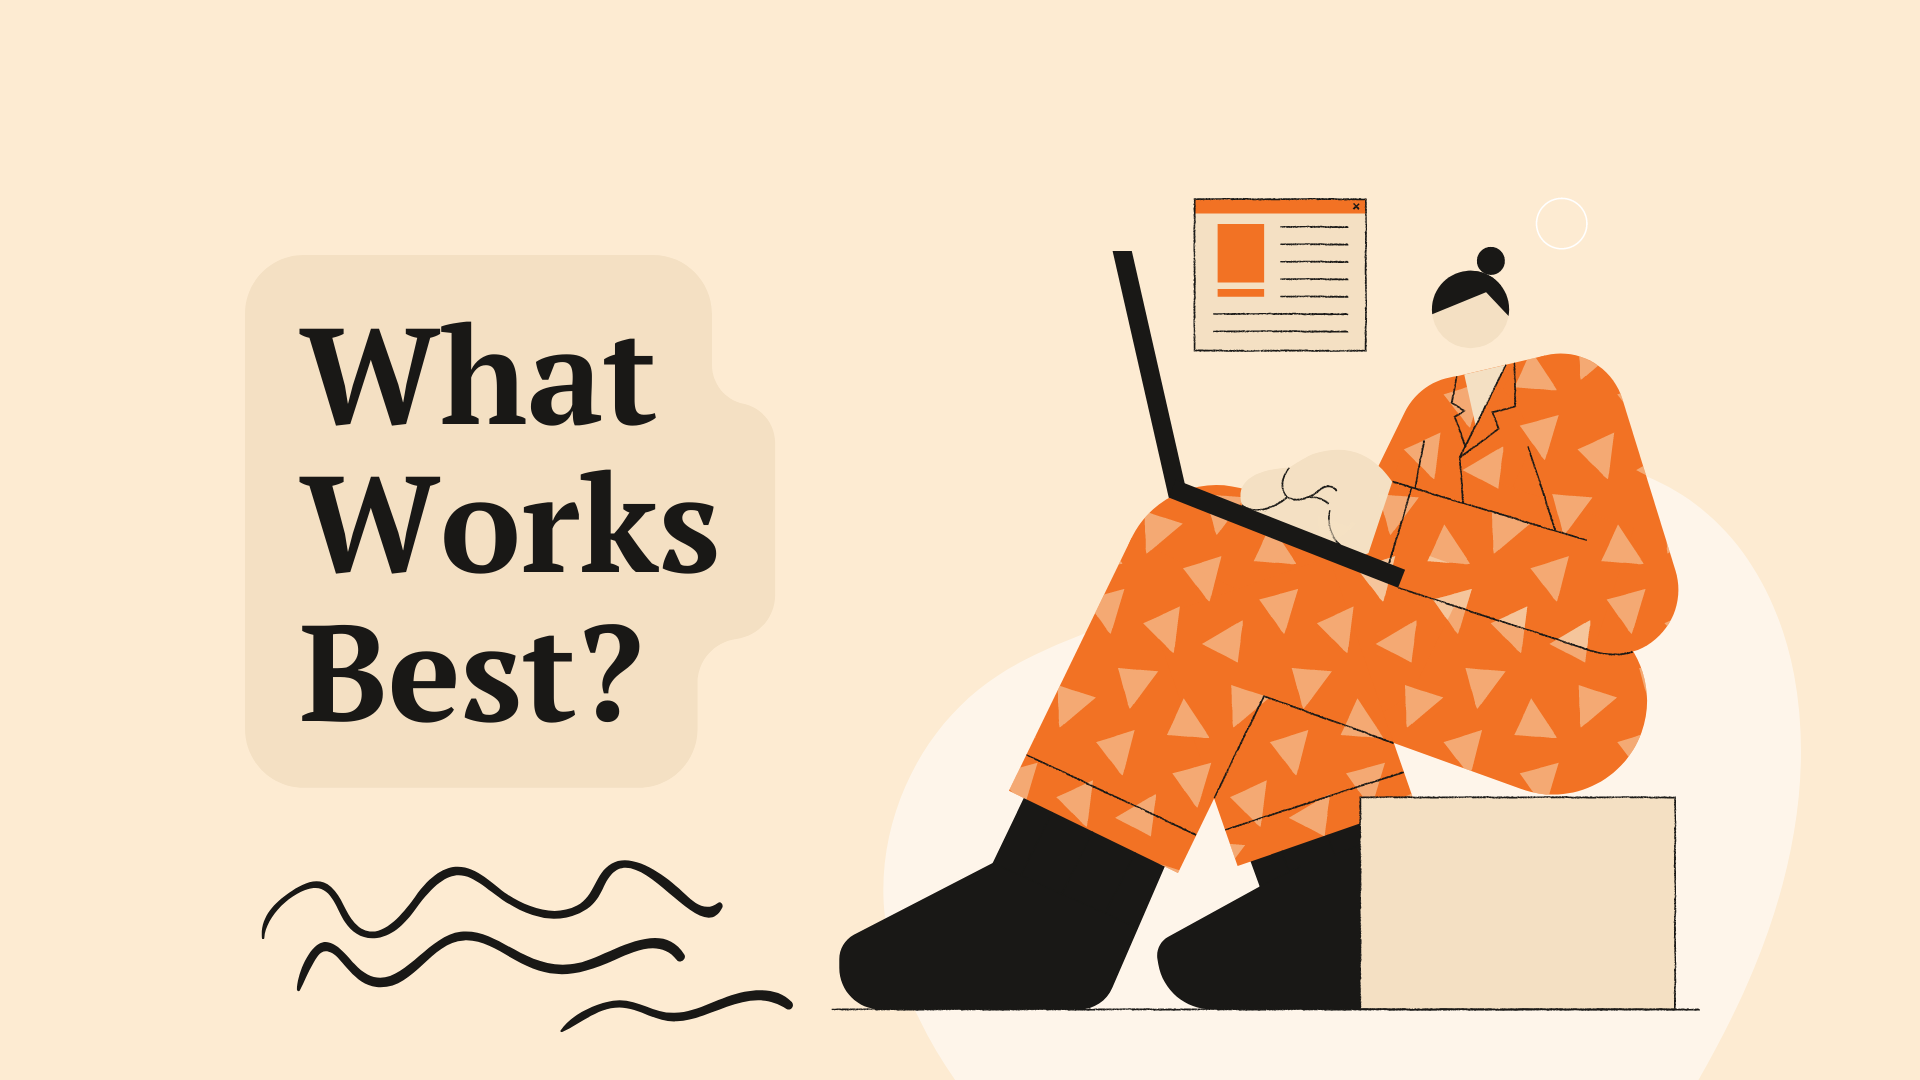 How Keywords Work in Etsy Search